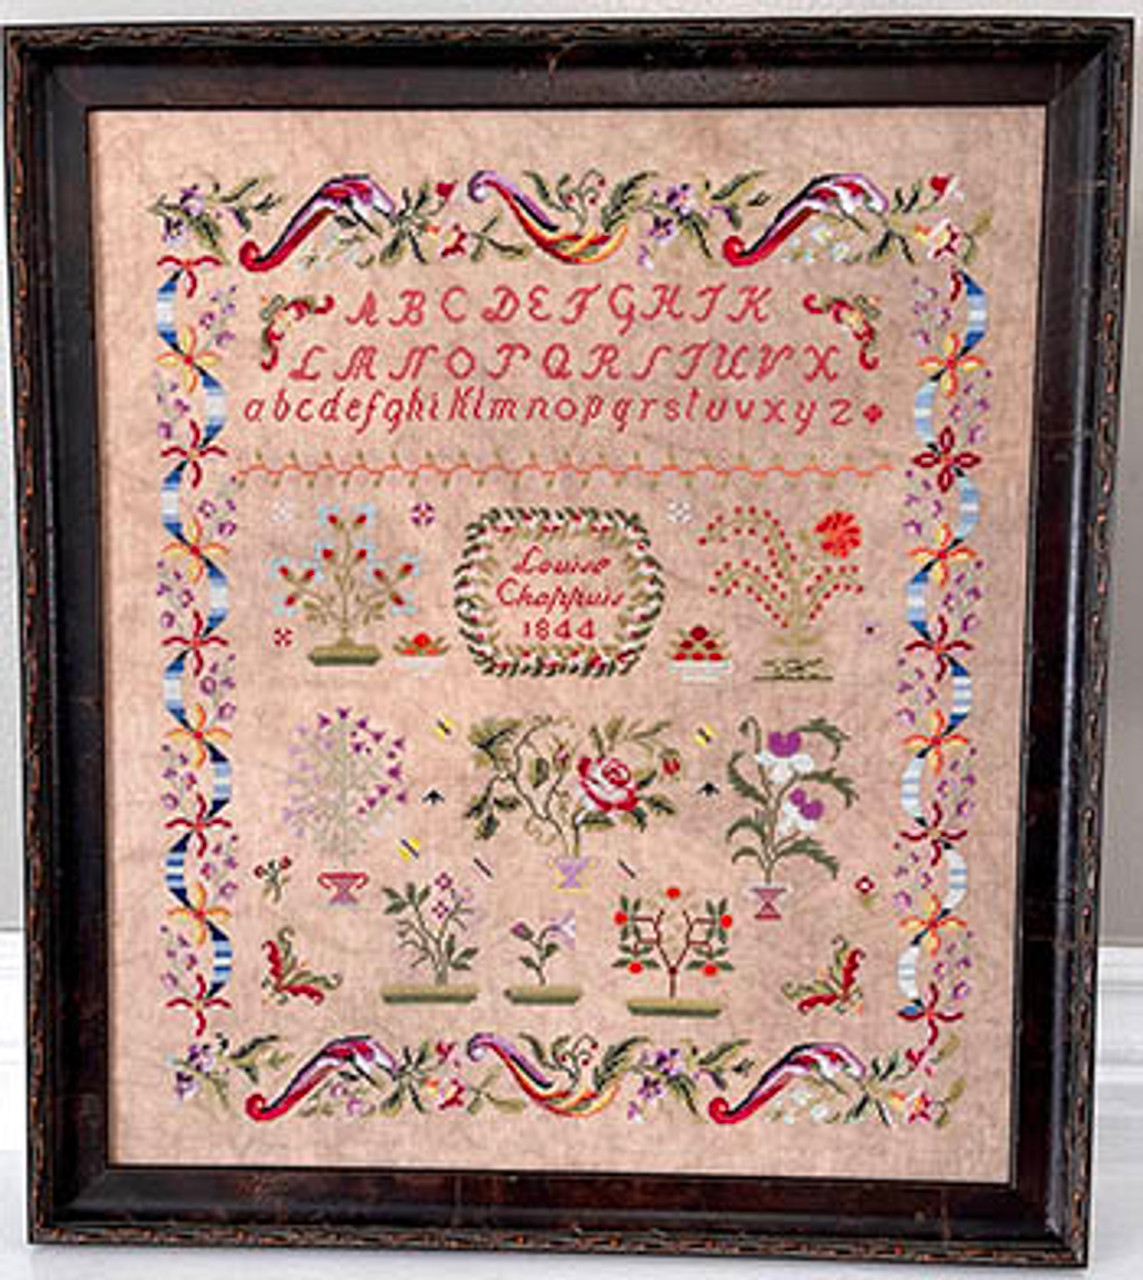 Louise Chappuis 1844 285 x 330 by Jan Hicks Creates 23-1441 YT - The  NeedleArt Closet